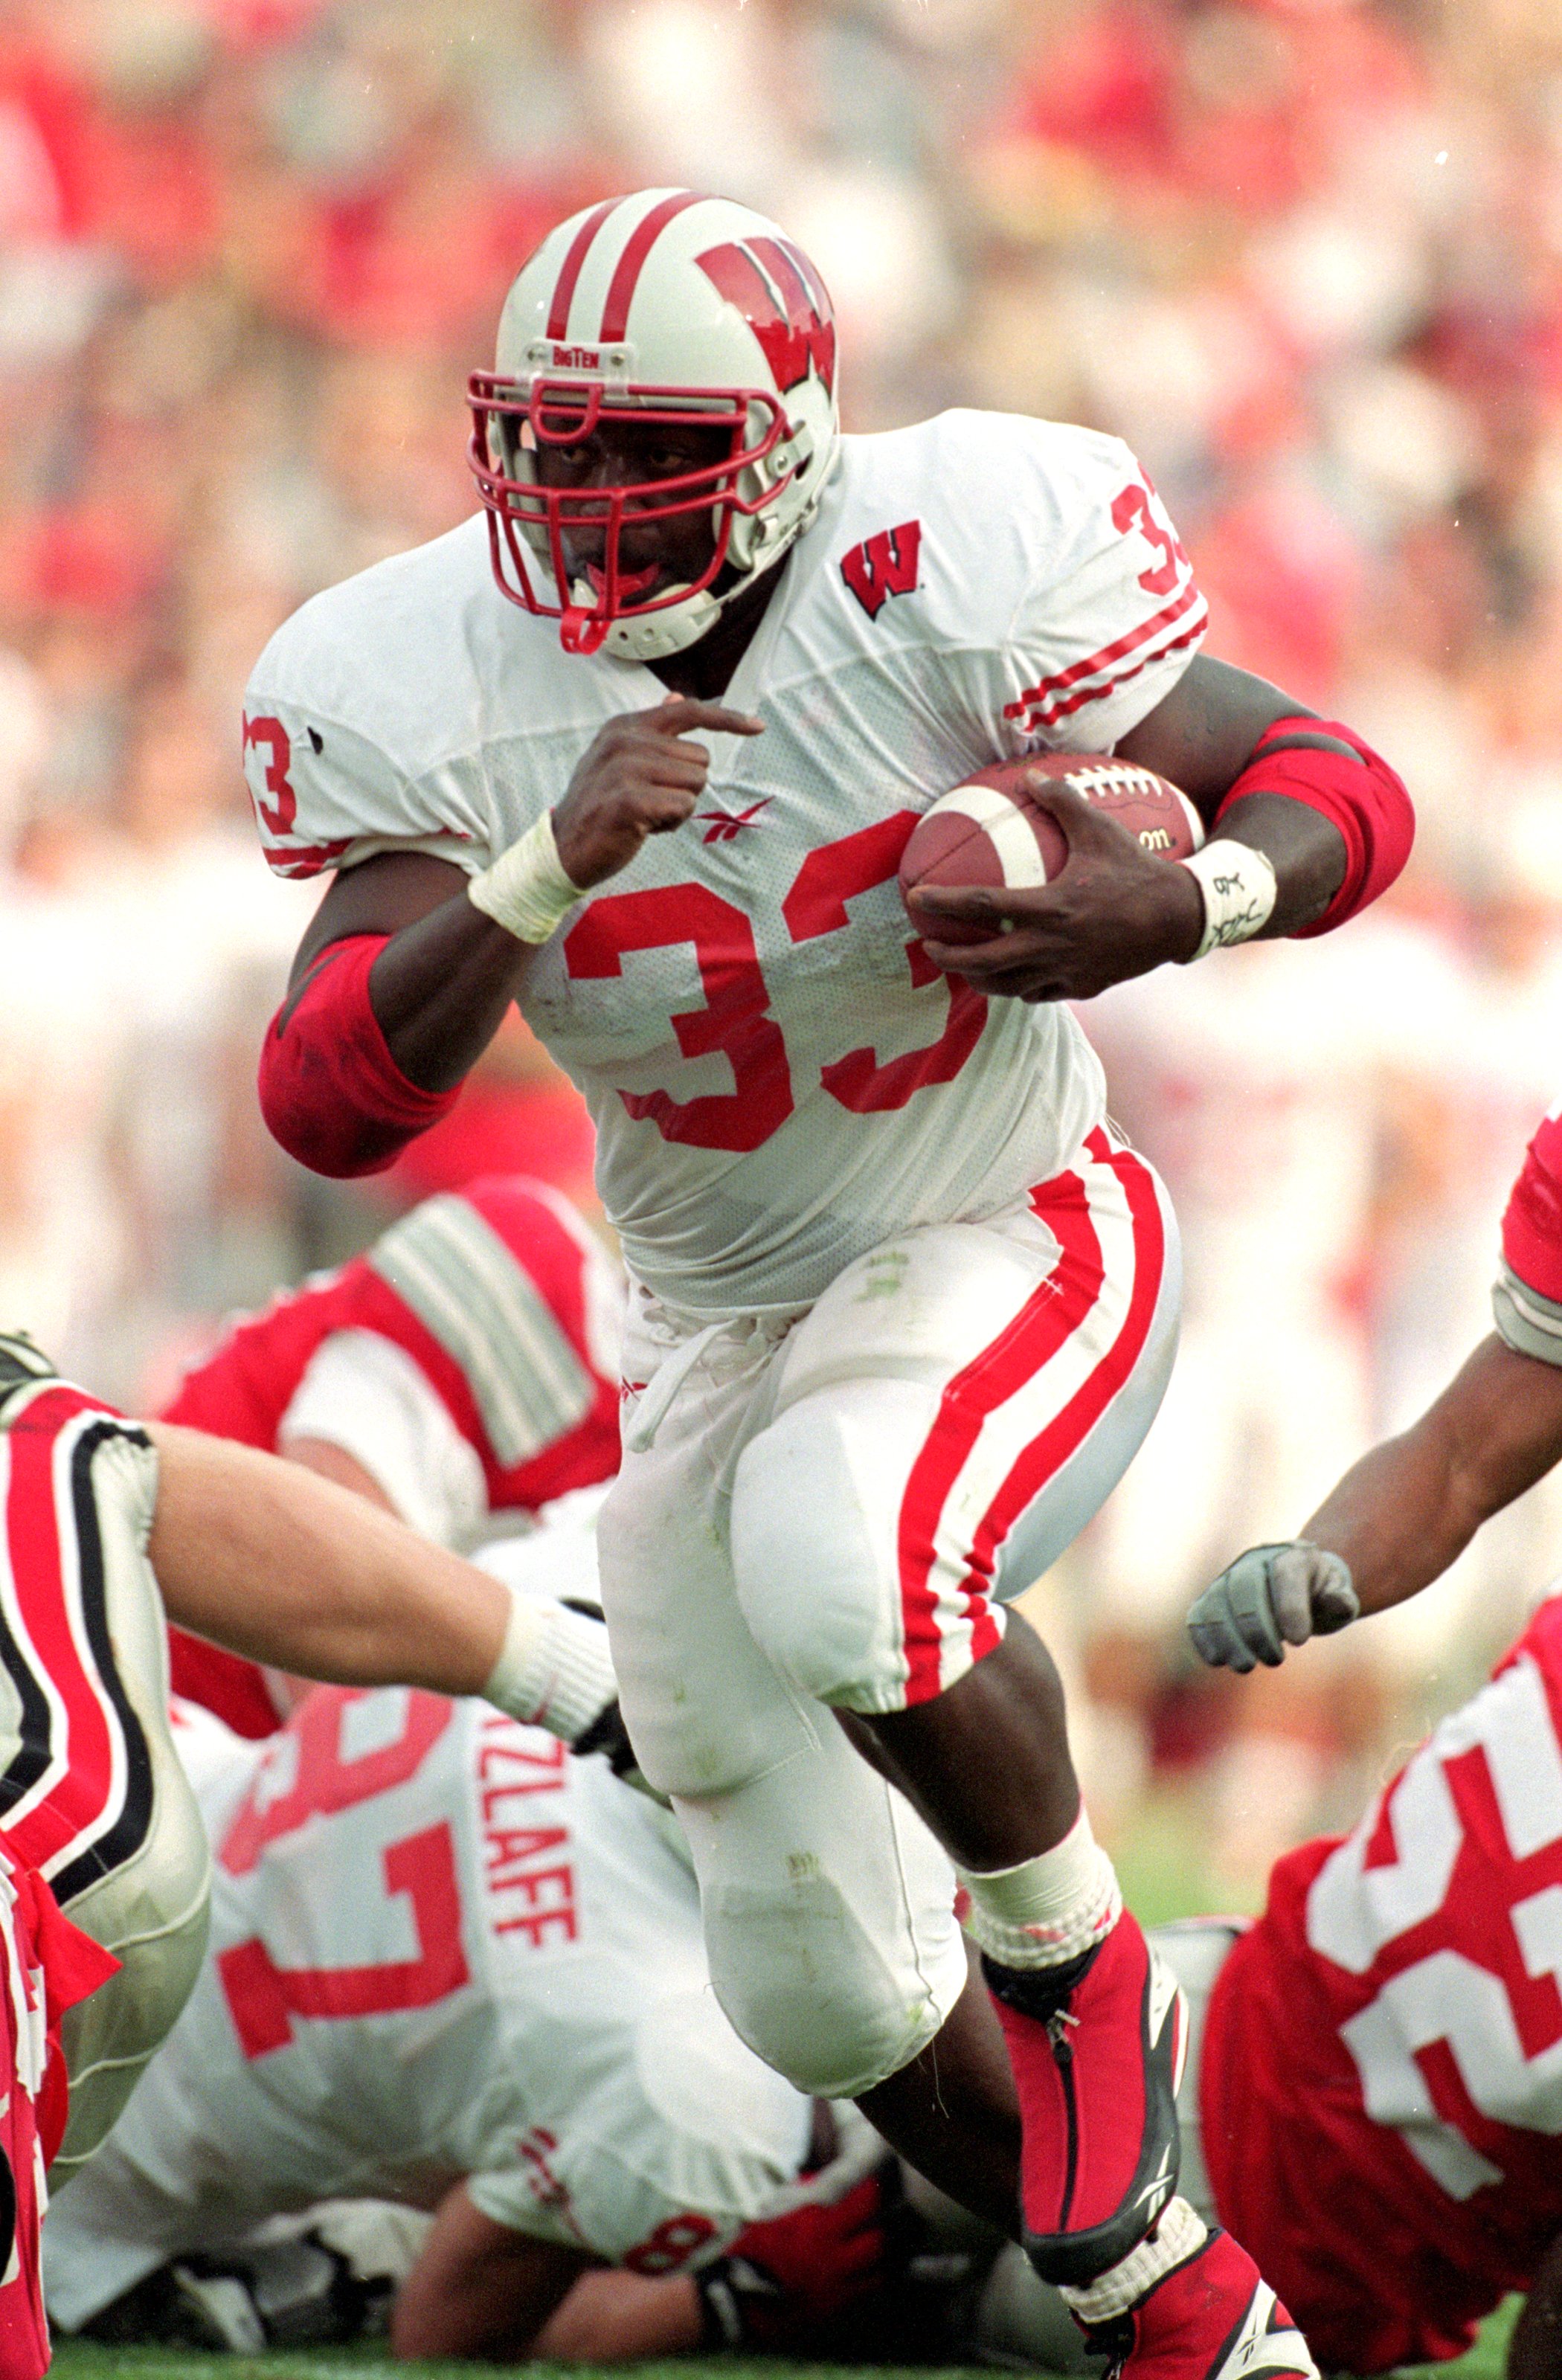 2 Oct 1999: Ron Dayne #33 of the Wisconsin Badgers carries the ball during the game against the Ohio State Buckeyes at the Ohio Stadium in Columbus, Ohio. The Badgers defeated the Buckeyes 42-17. Mandatory Credit: Tom Hauck  /Allsport